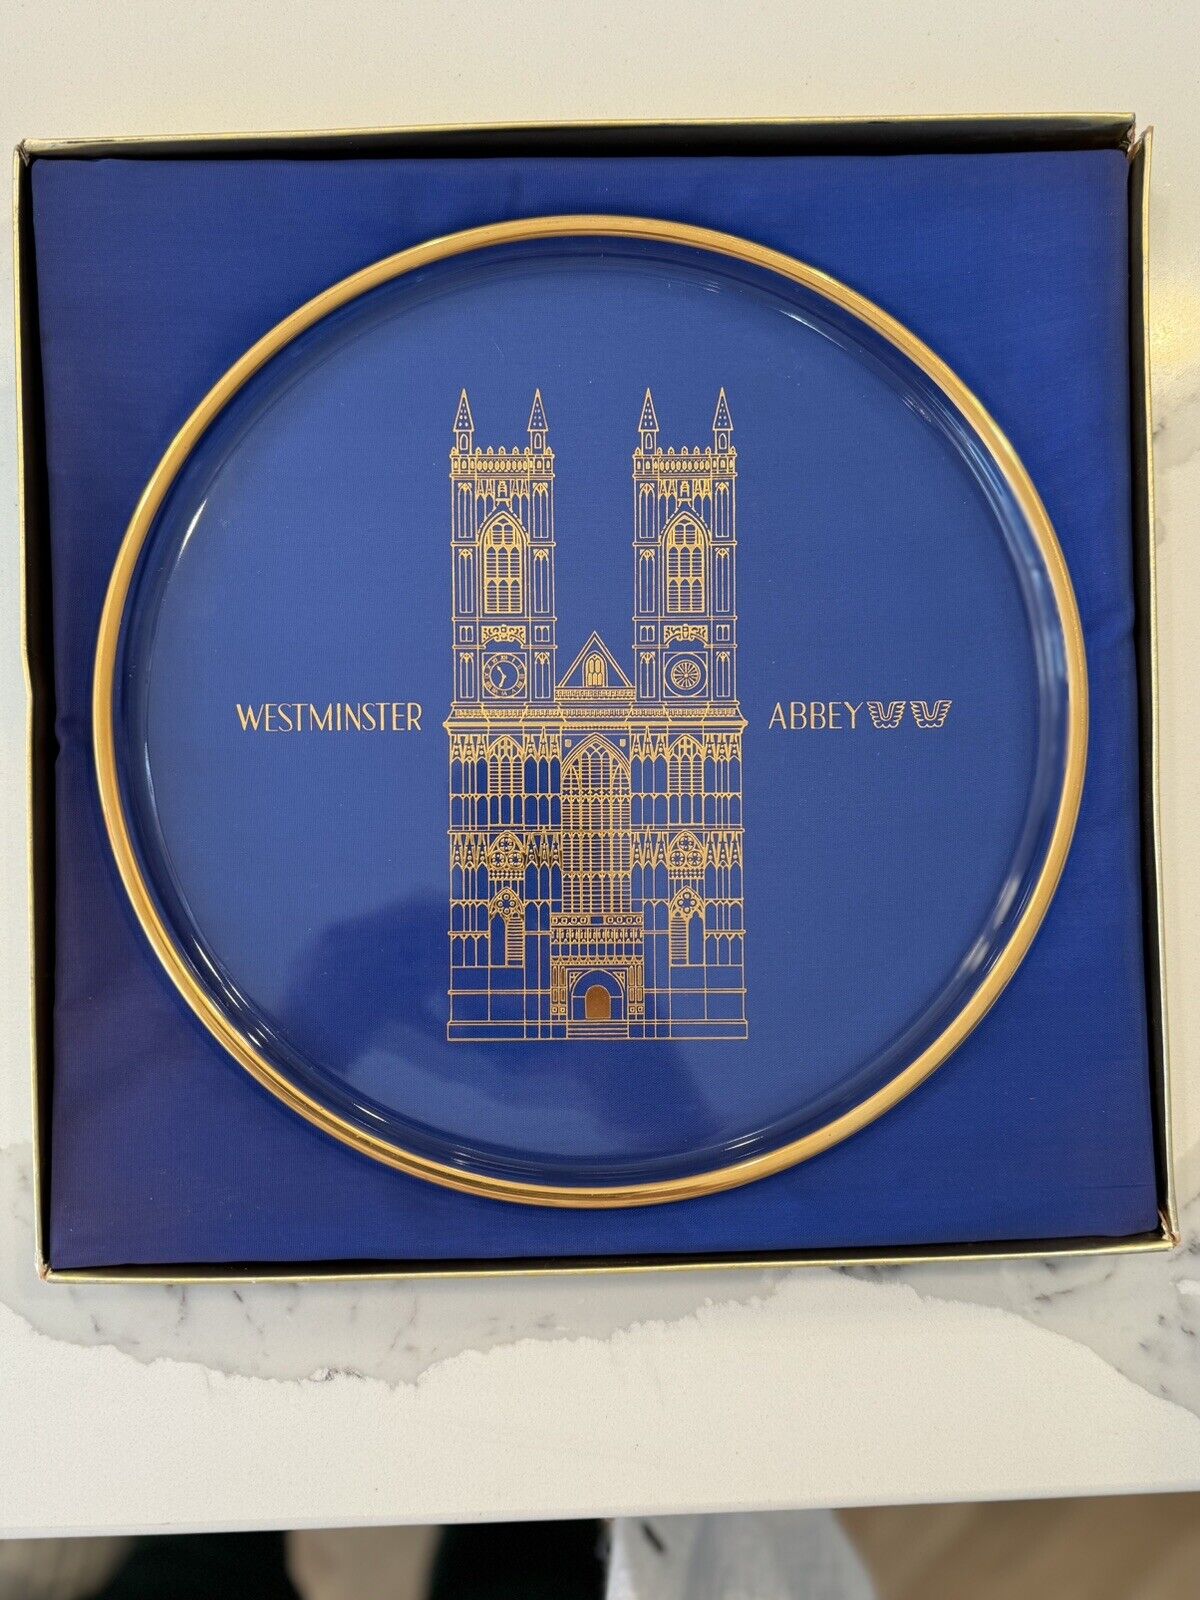 1971 Orrefors Annual Plate Limited Edition Crystal Plate Westminster Abbey